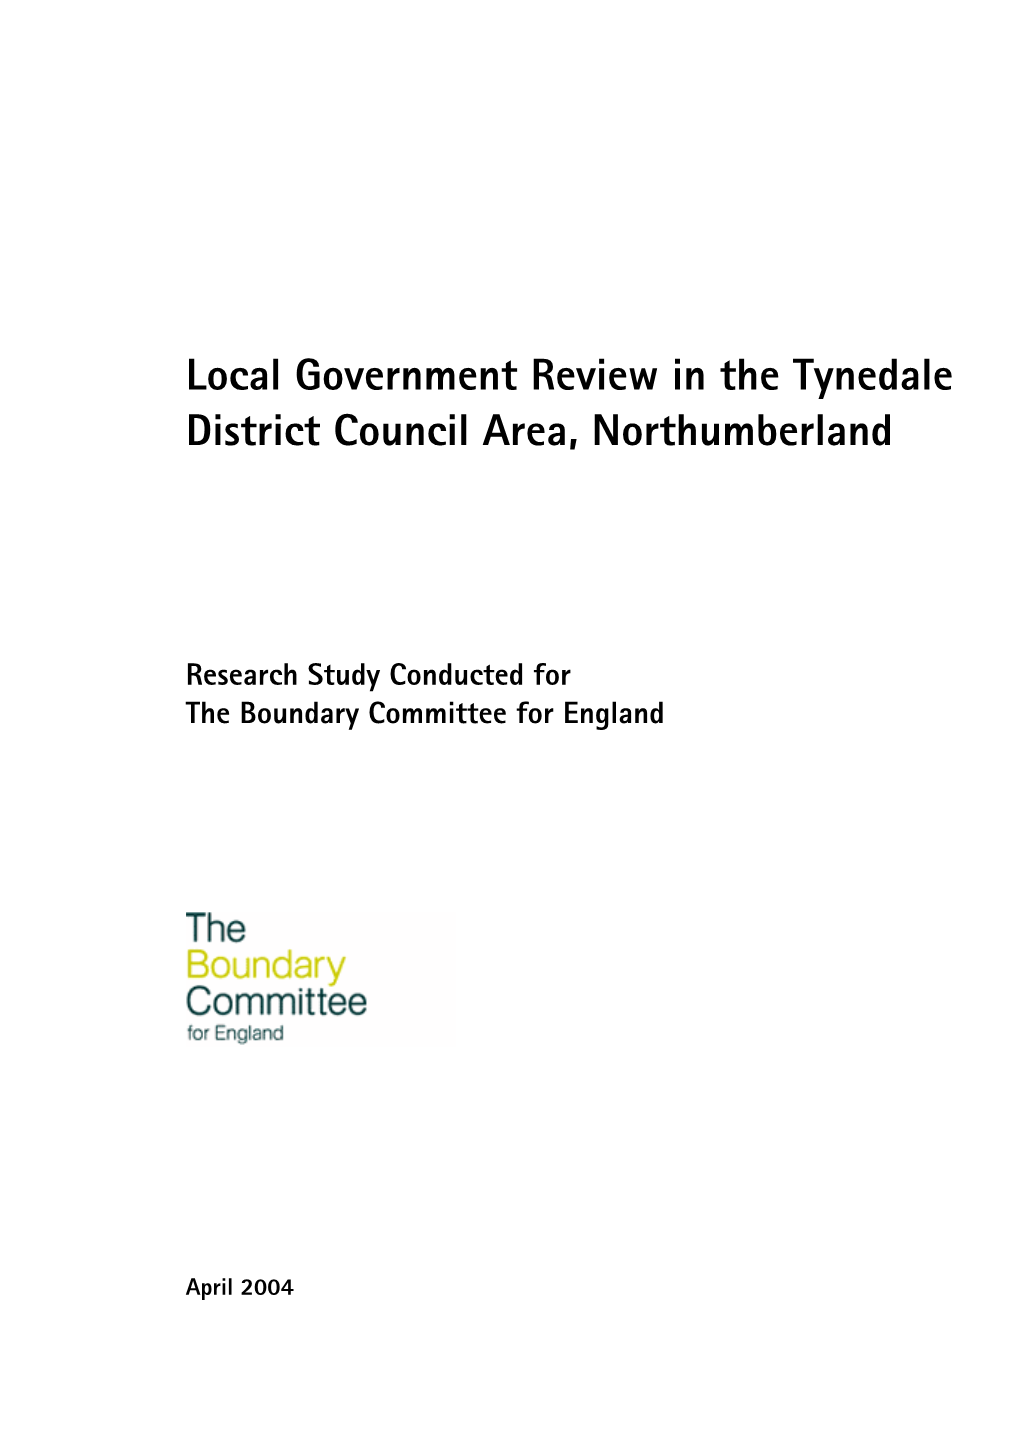 Local Government Review in the Tynedale District Council Area, Northumberland